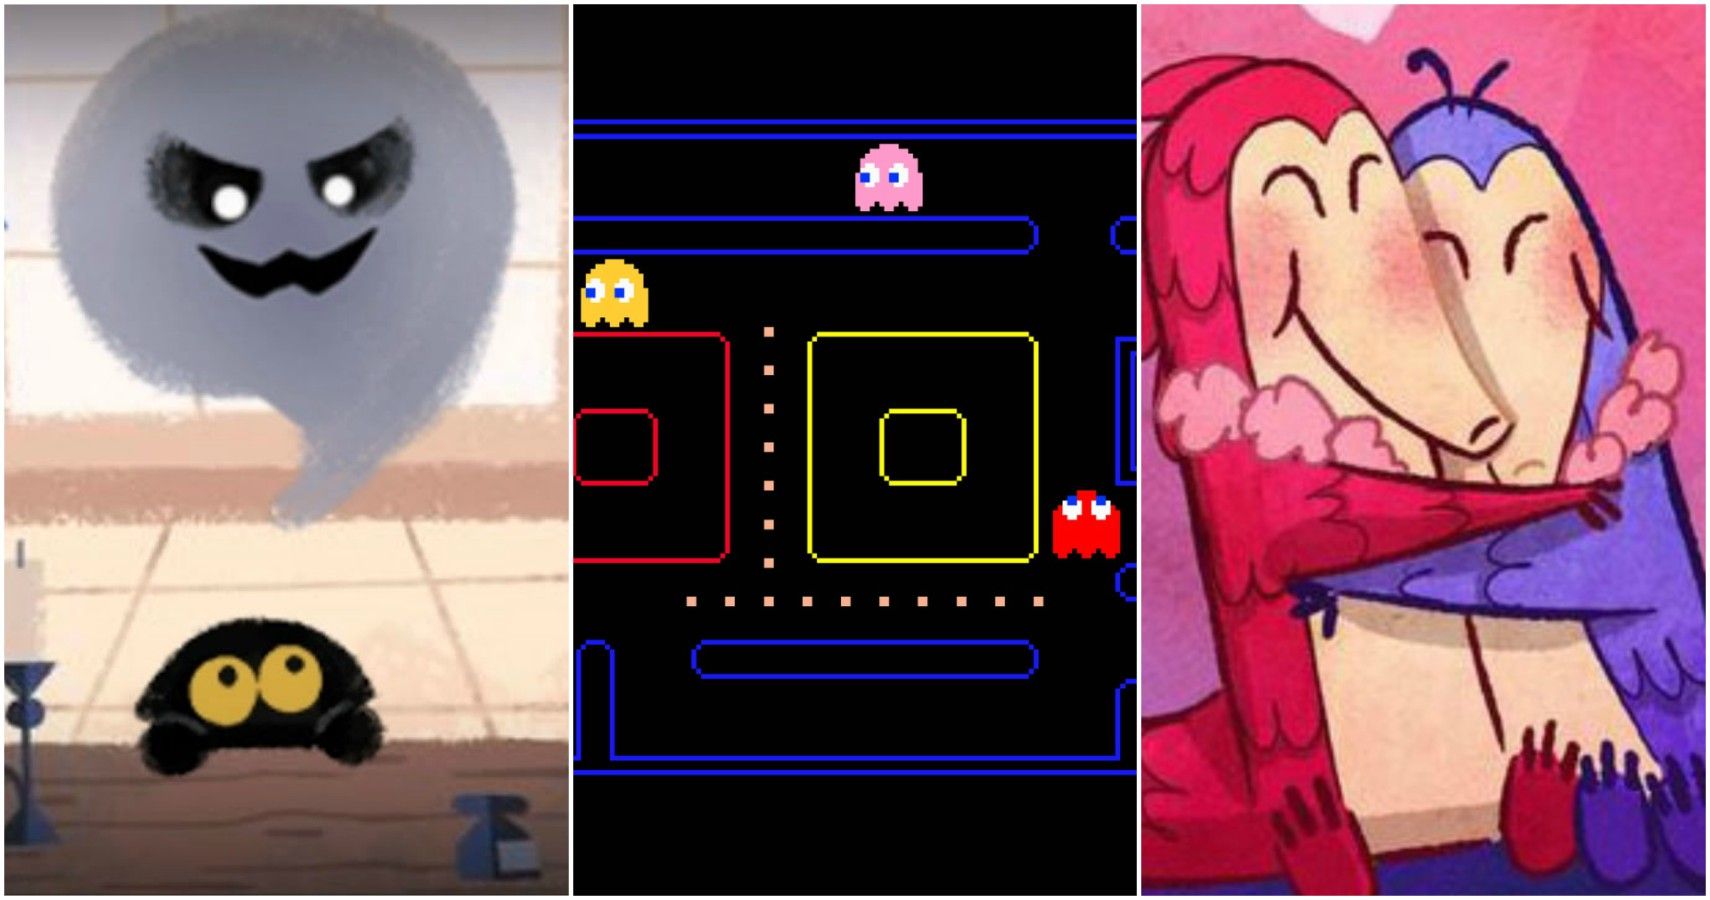 PacMan 30th Anniversary & 9 Other Google Doodles You Can Still Play